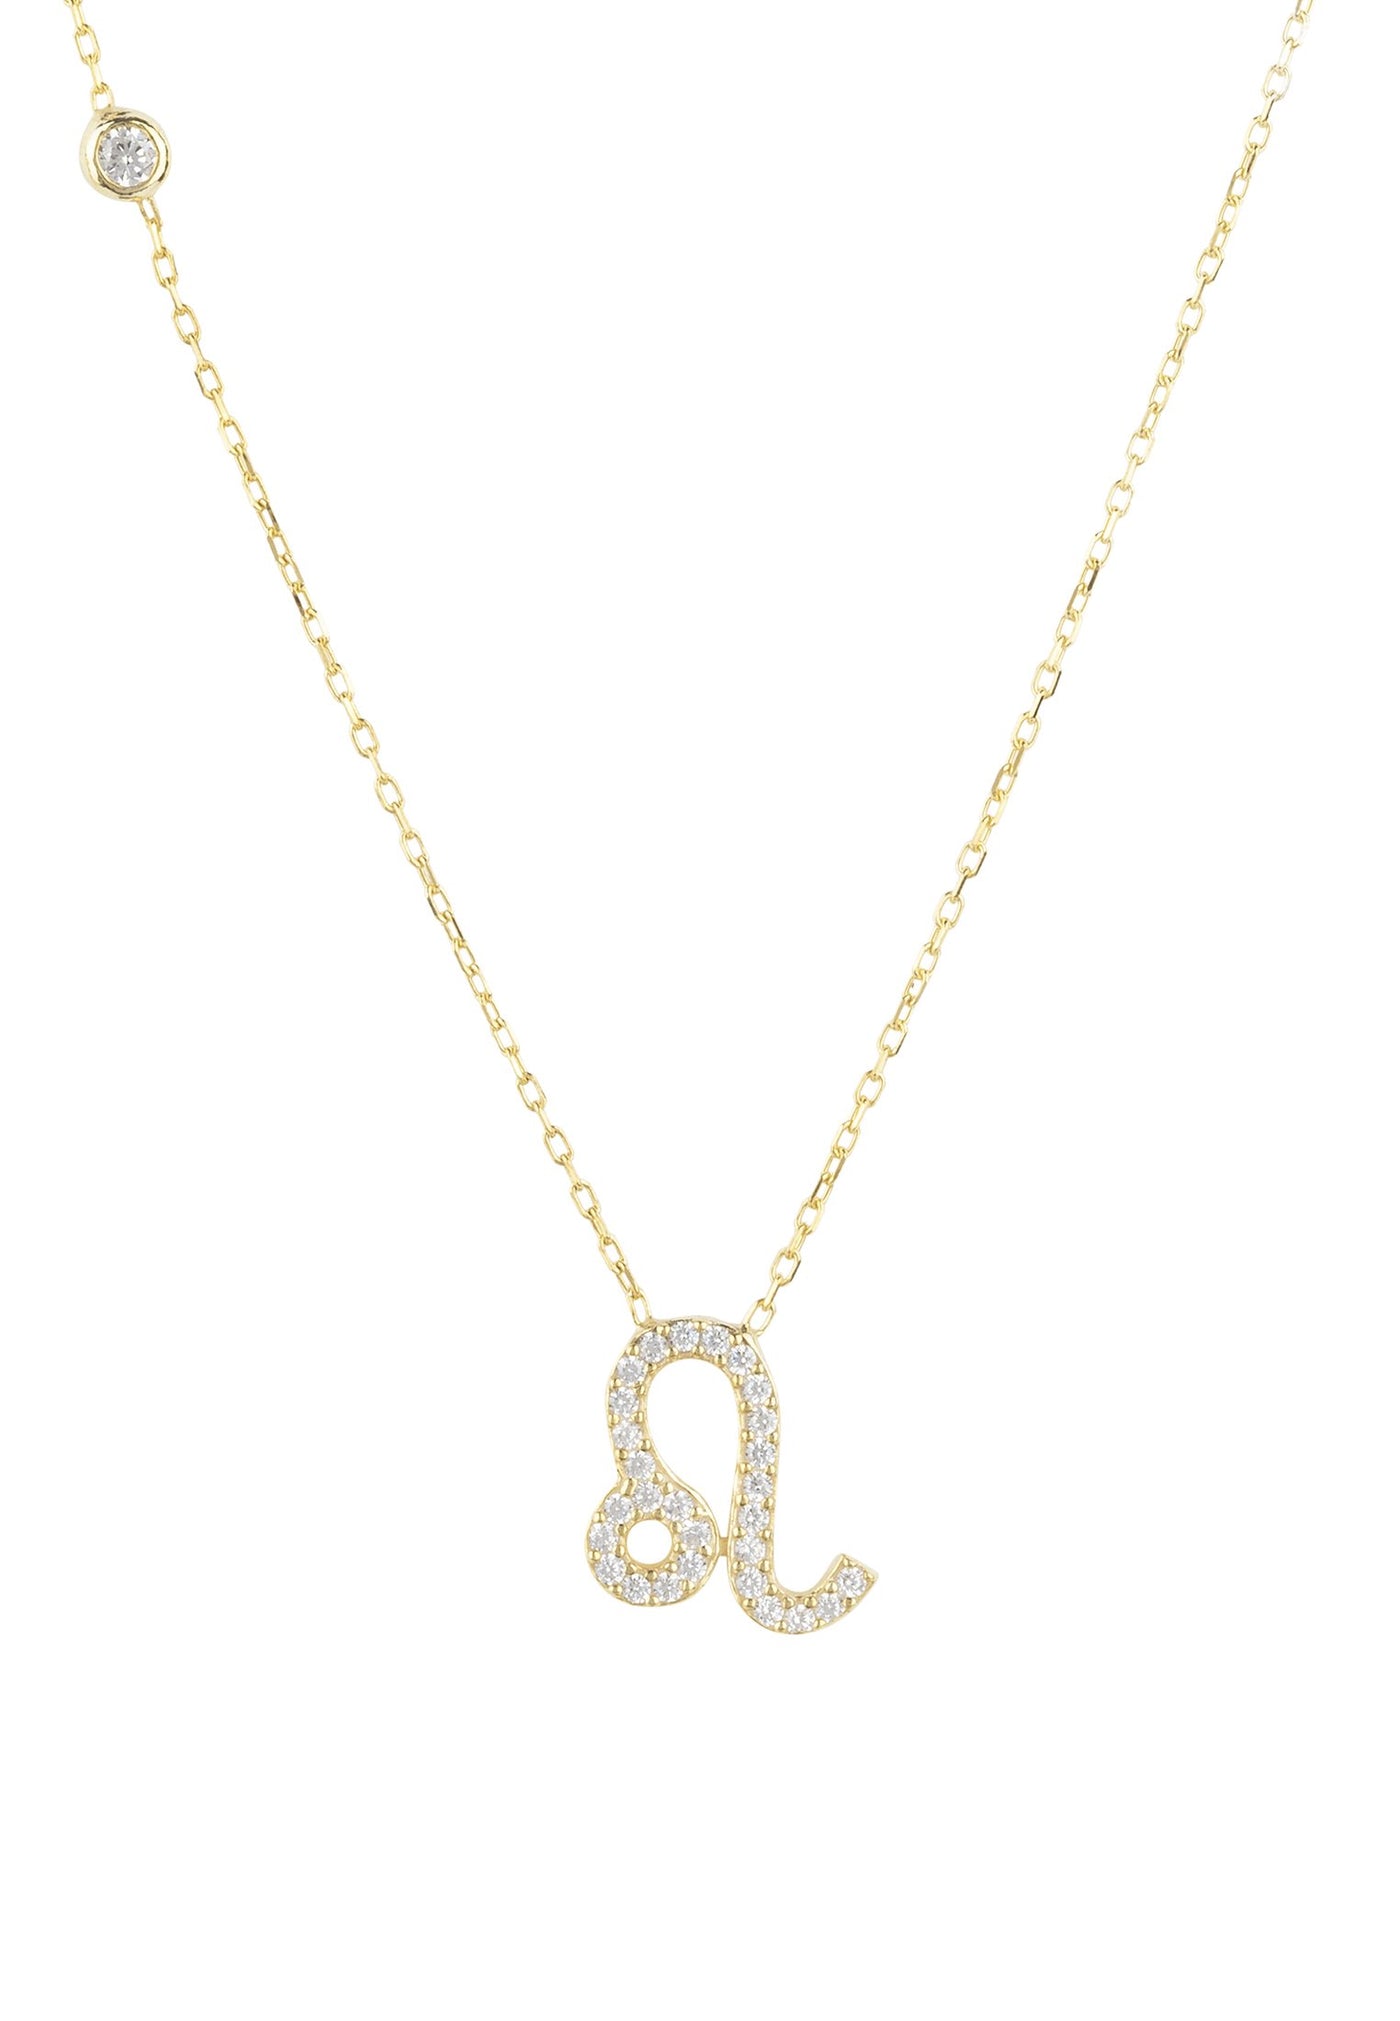 Leo - necklace - 22 carat gold plated - zircons